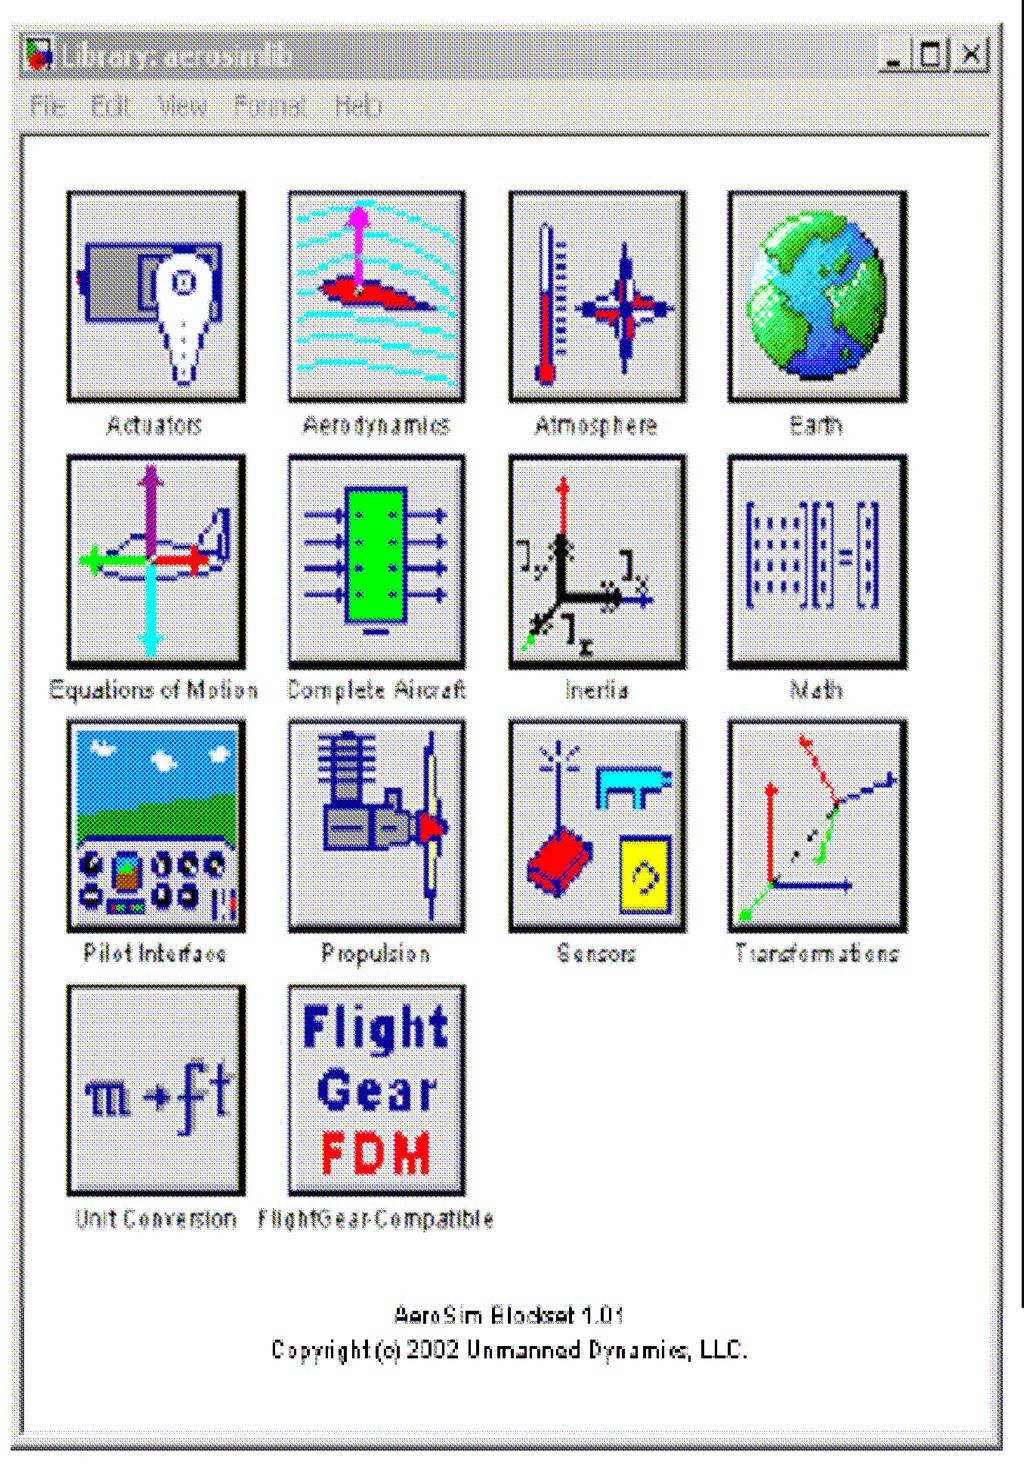 SIFCAD: Characteristics Flight Simulator in Simulink Environment Based on commercially available Simulink Toolboxes Graphics